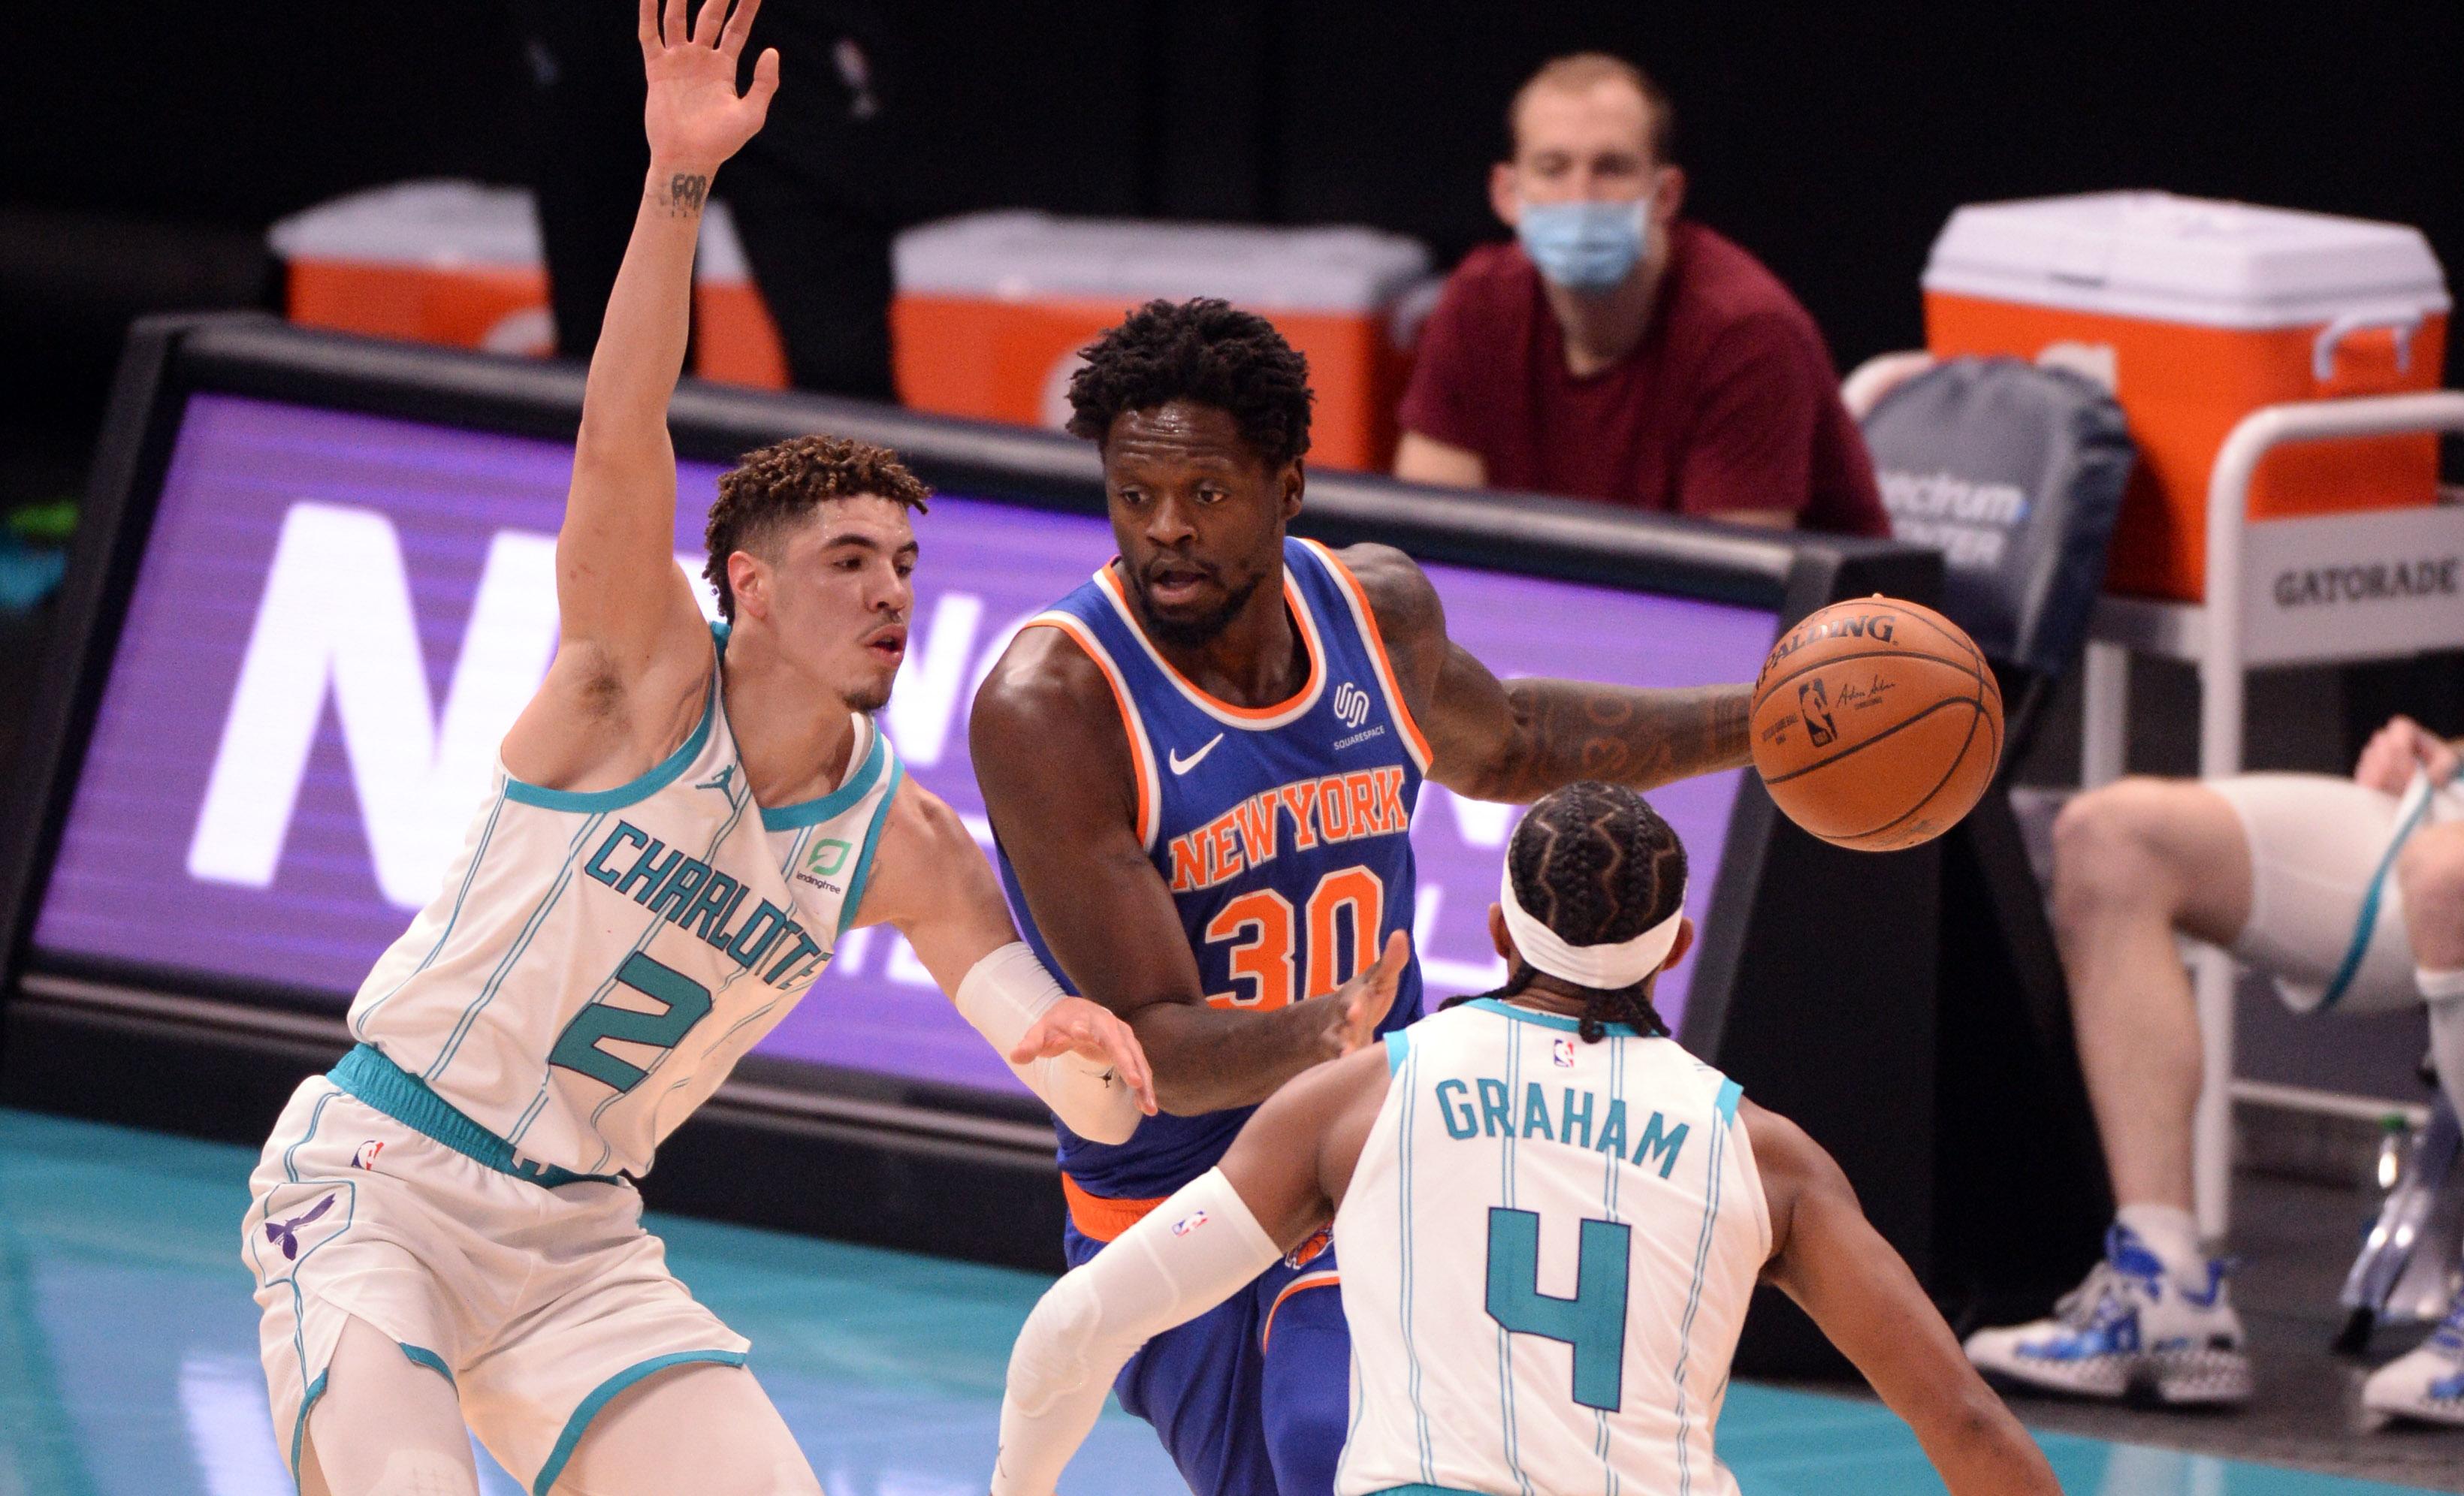 Jan 11, 2021; Charlotte, North Carolina, USA; New York Knicks forward center Julius Randle (30) dribbles the ball while defended by Charlotte Hornets guard LaMelo Ball (2) and guard Devonte Graham (4) during the second half at the Spectrum Center. / © Sam Sharpe-USA TODAY Sports